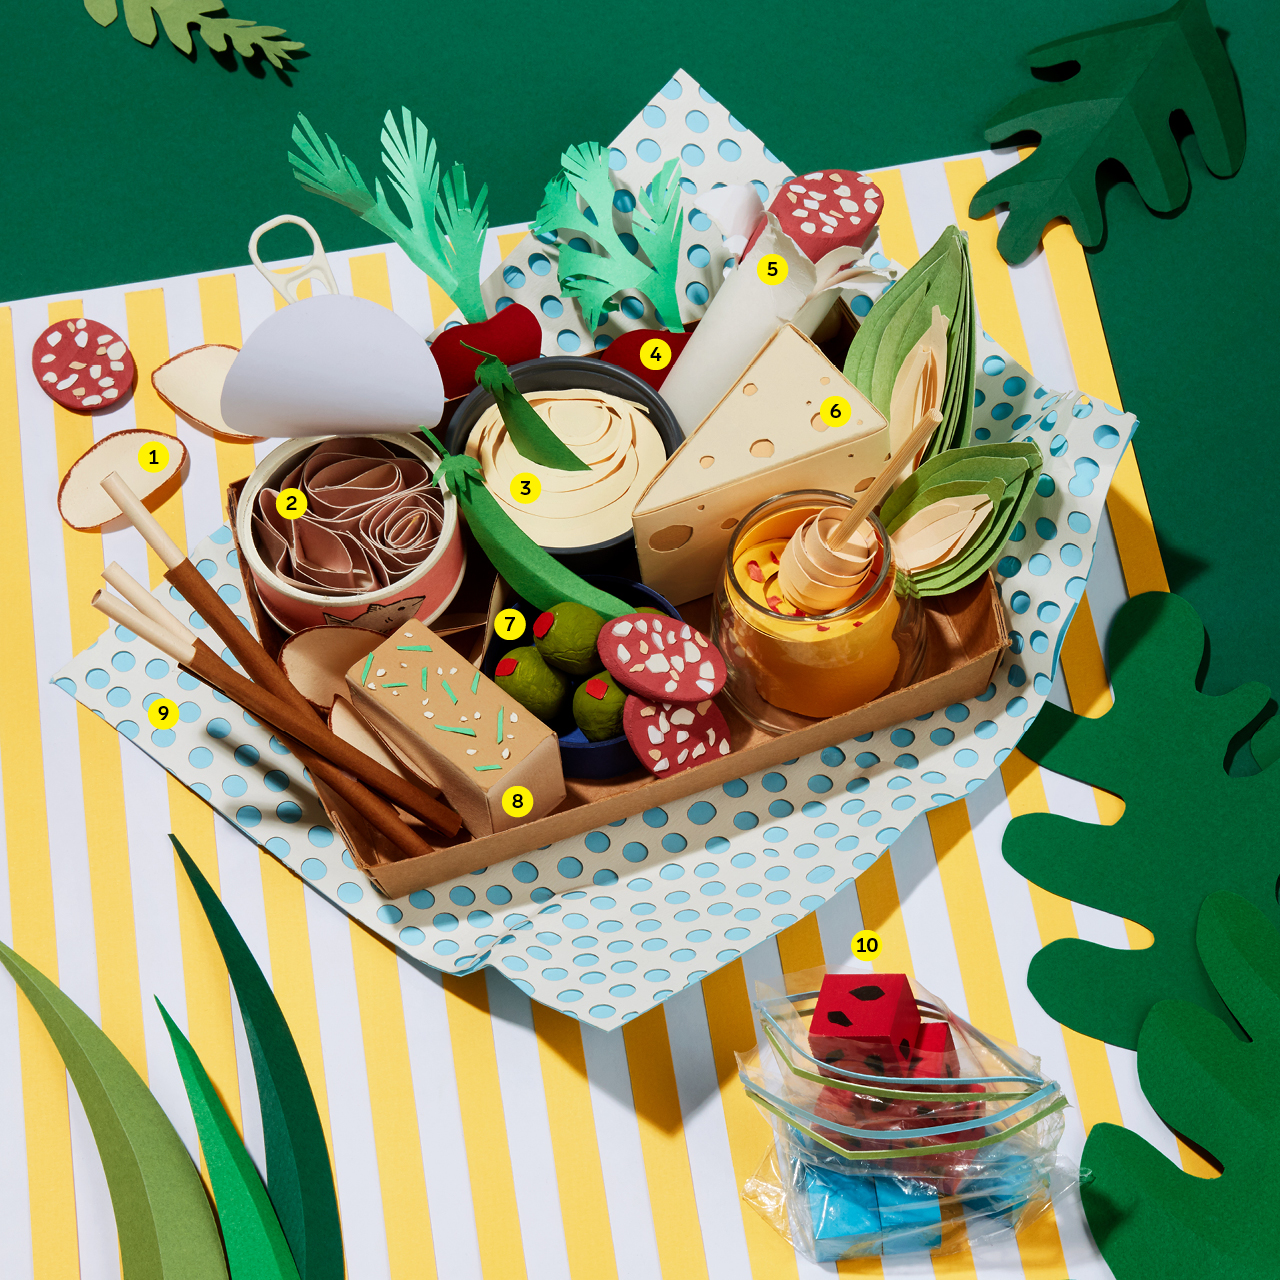 Paper picnic basket, decorated by assorted foods, treats, games